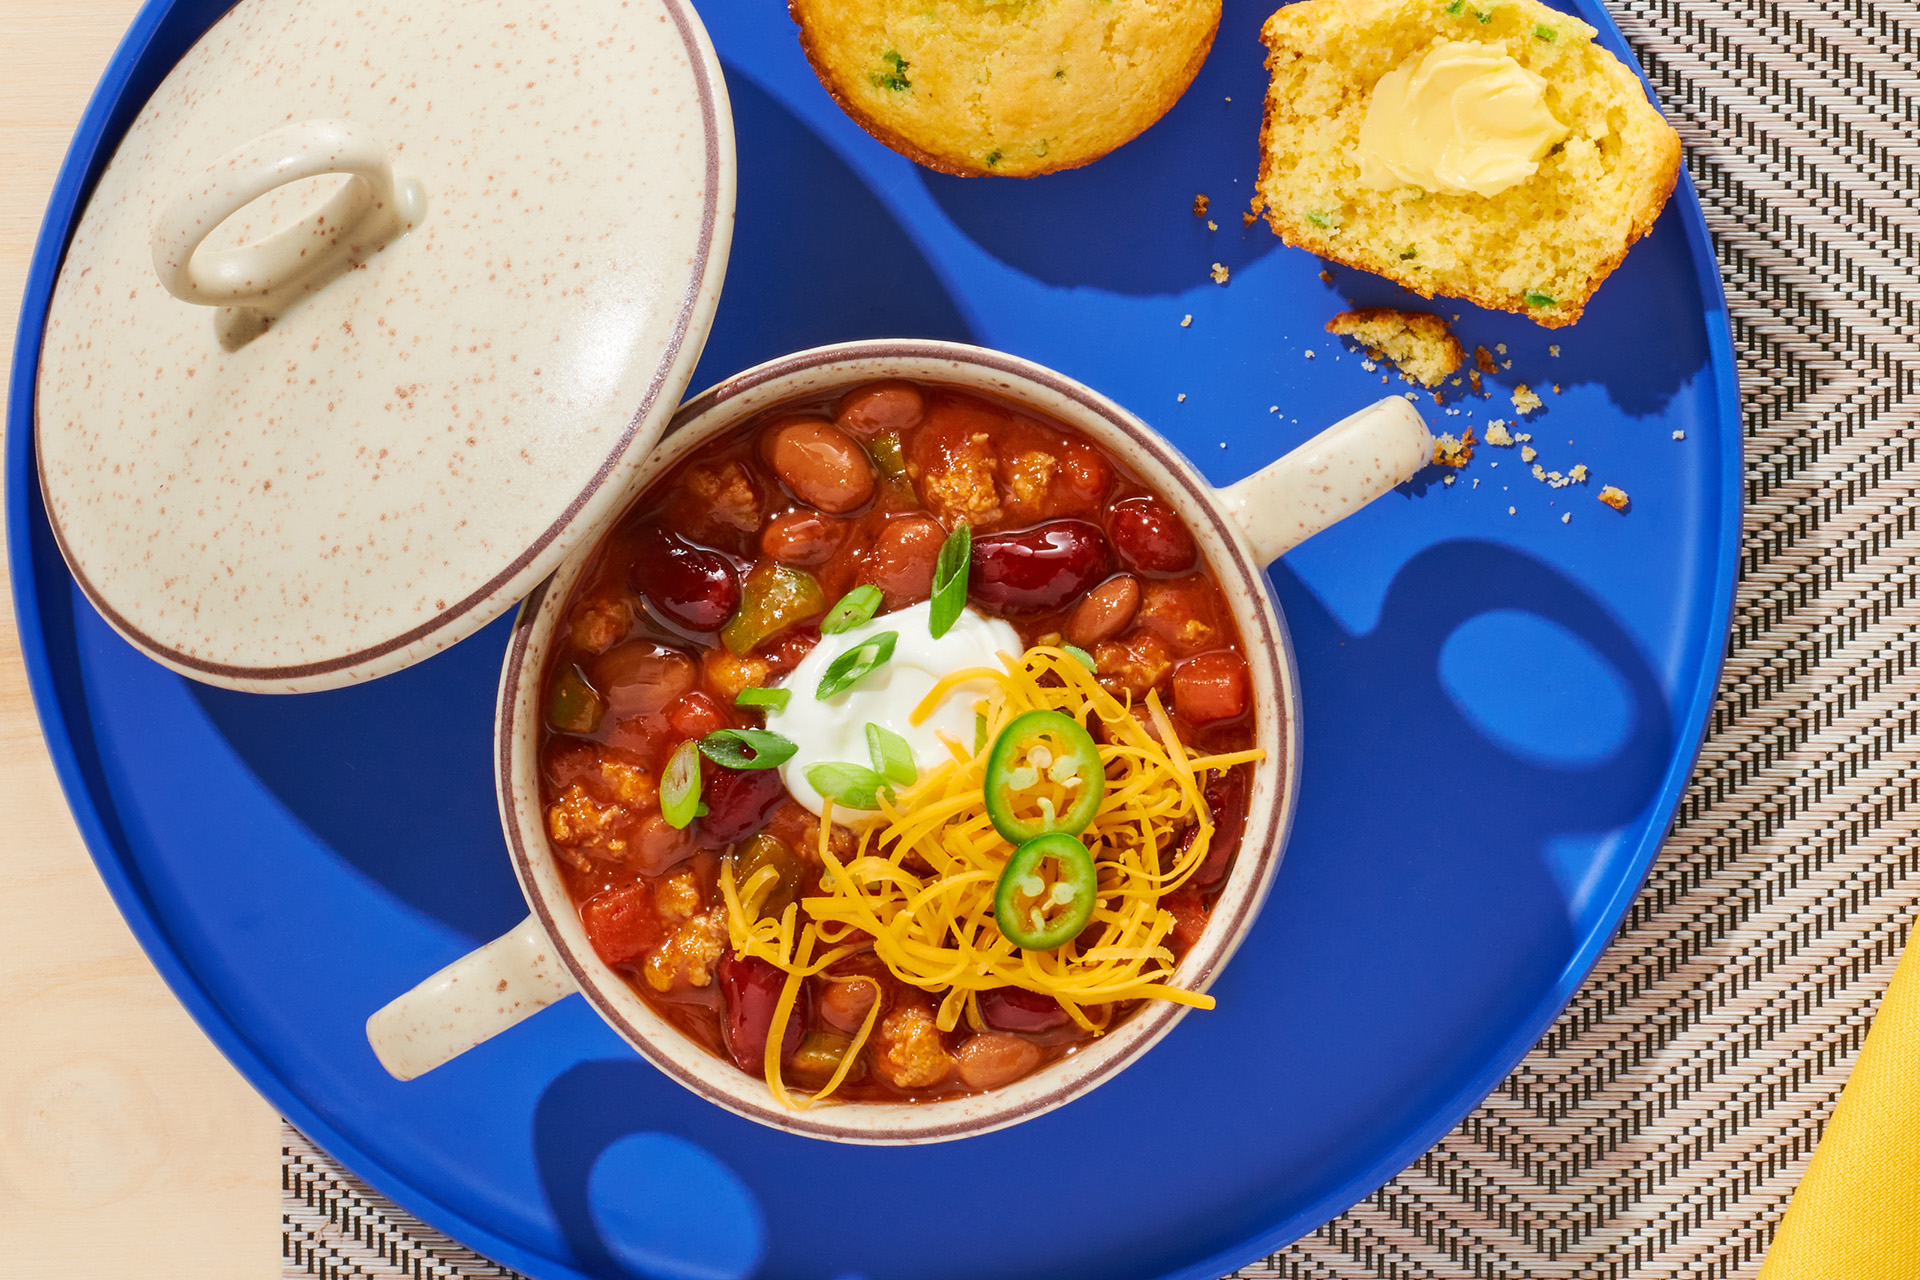 A bowl of chili topped with sour cream, jalapenos, and shredded cheese on a blue tray with corn muffins